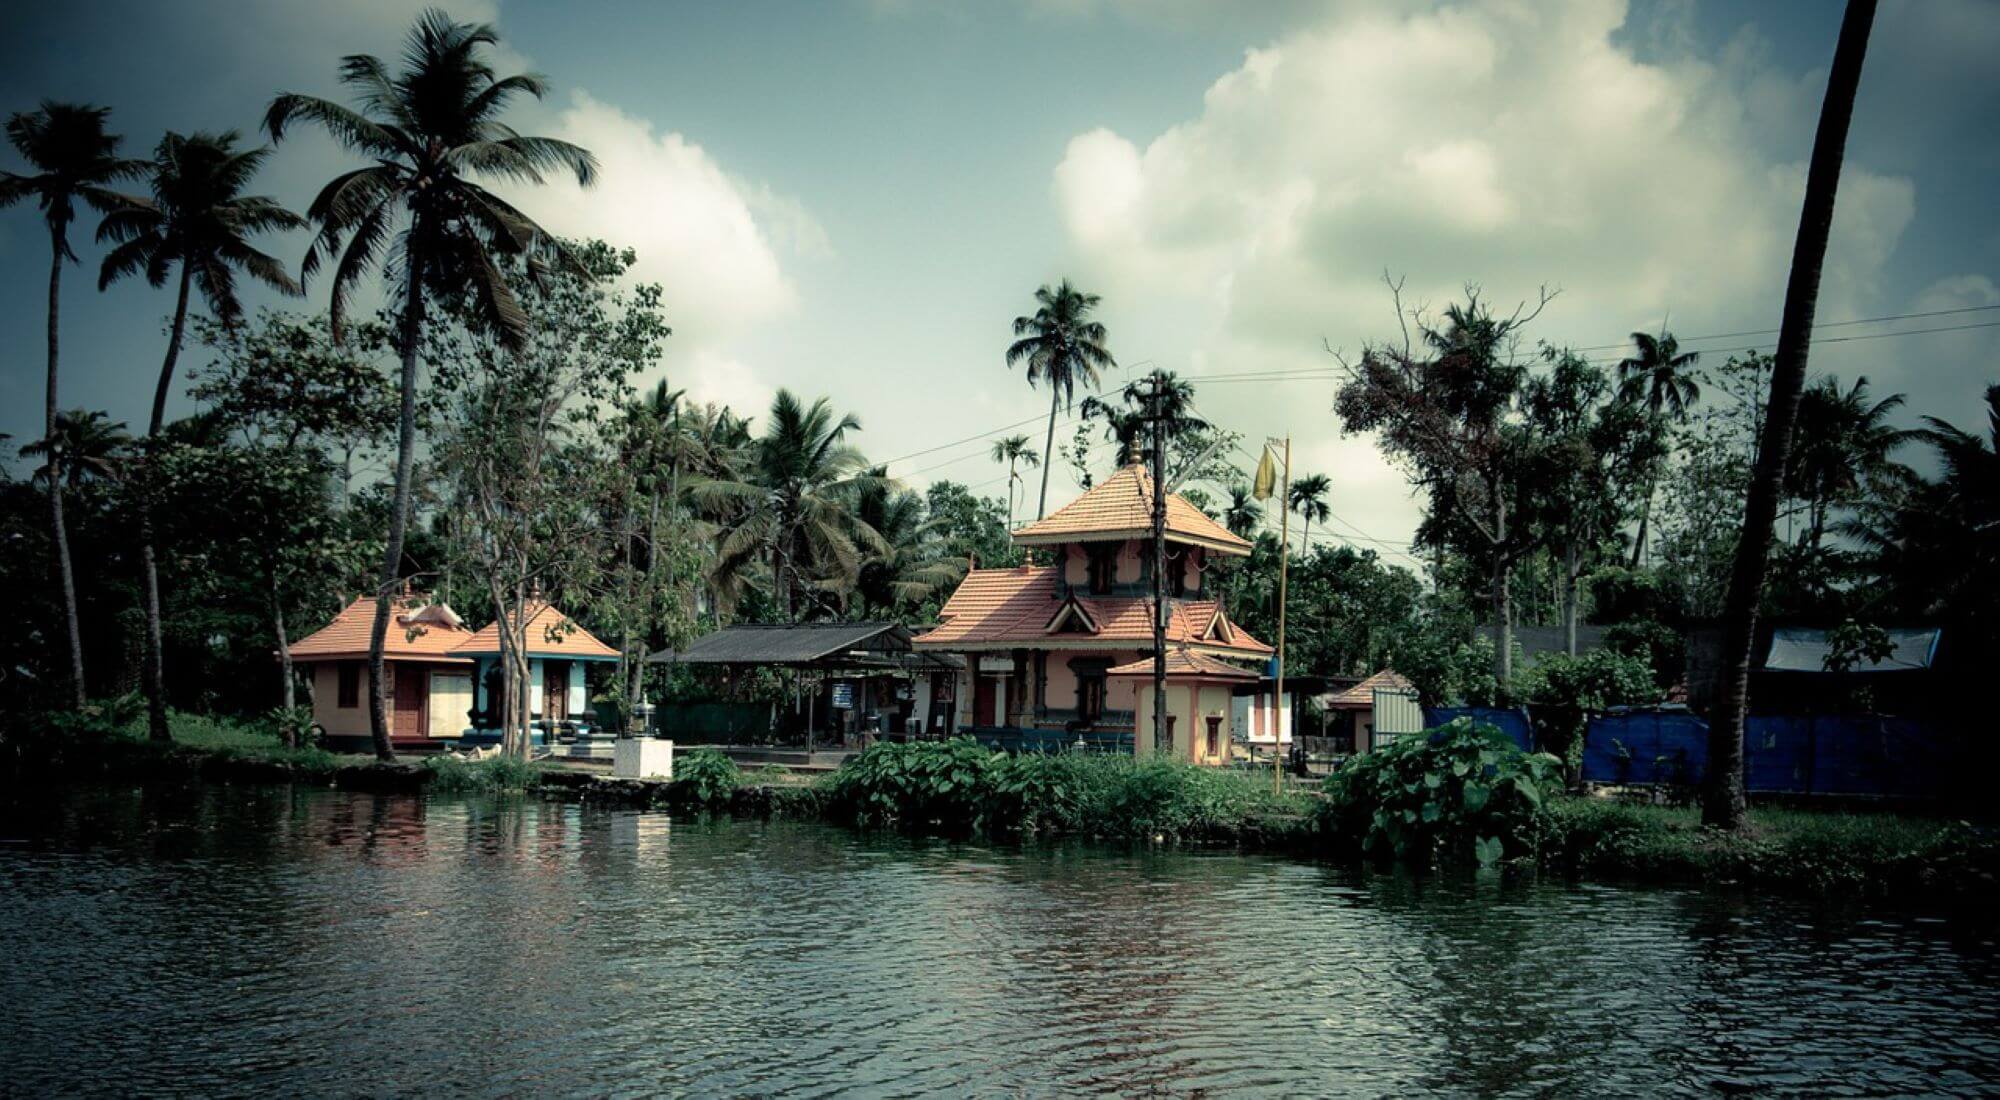 lake surrounded by lush vegetation, palm trees and houses by the lake in Kerala